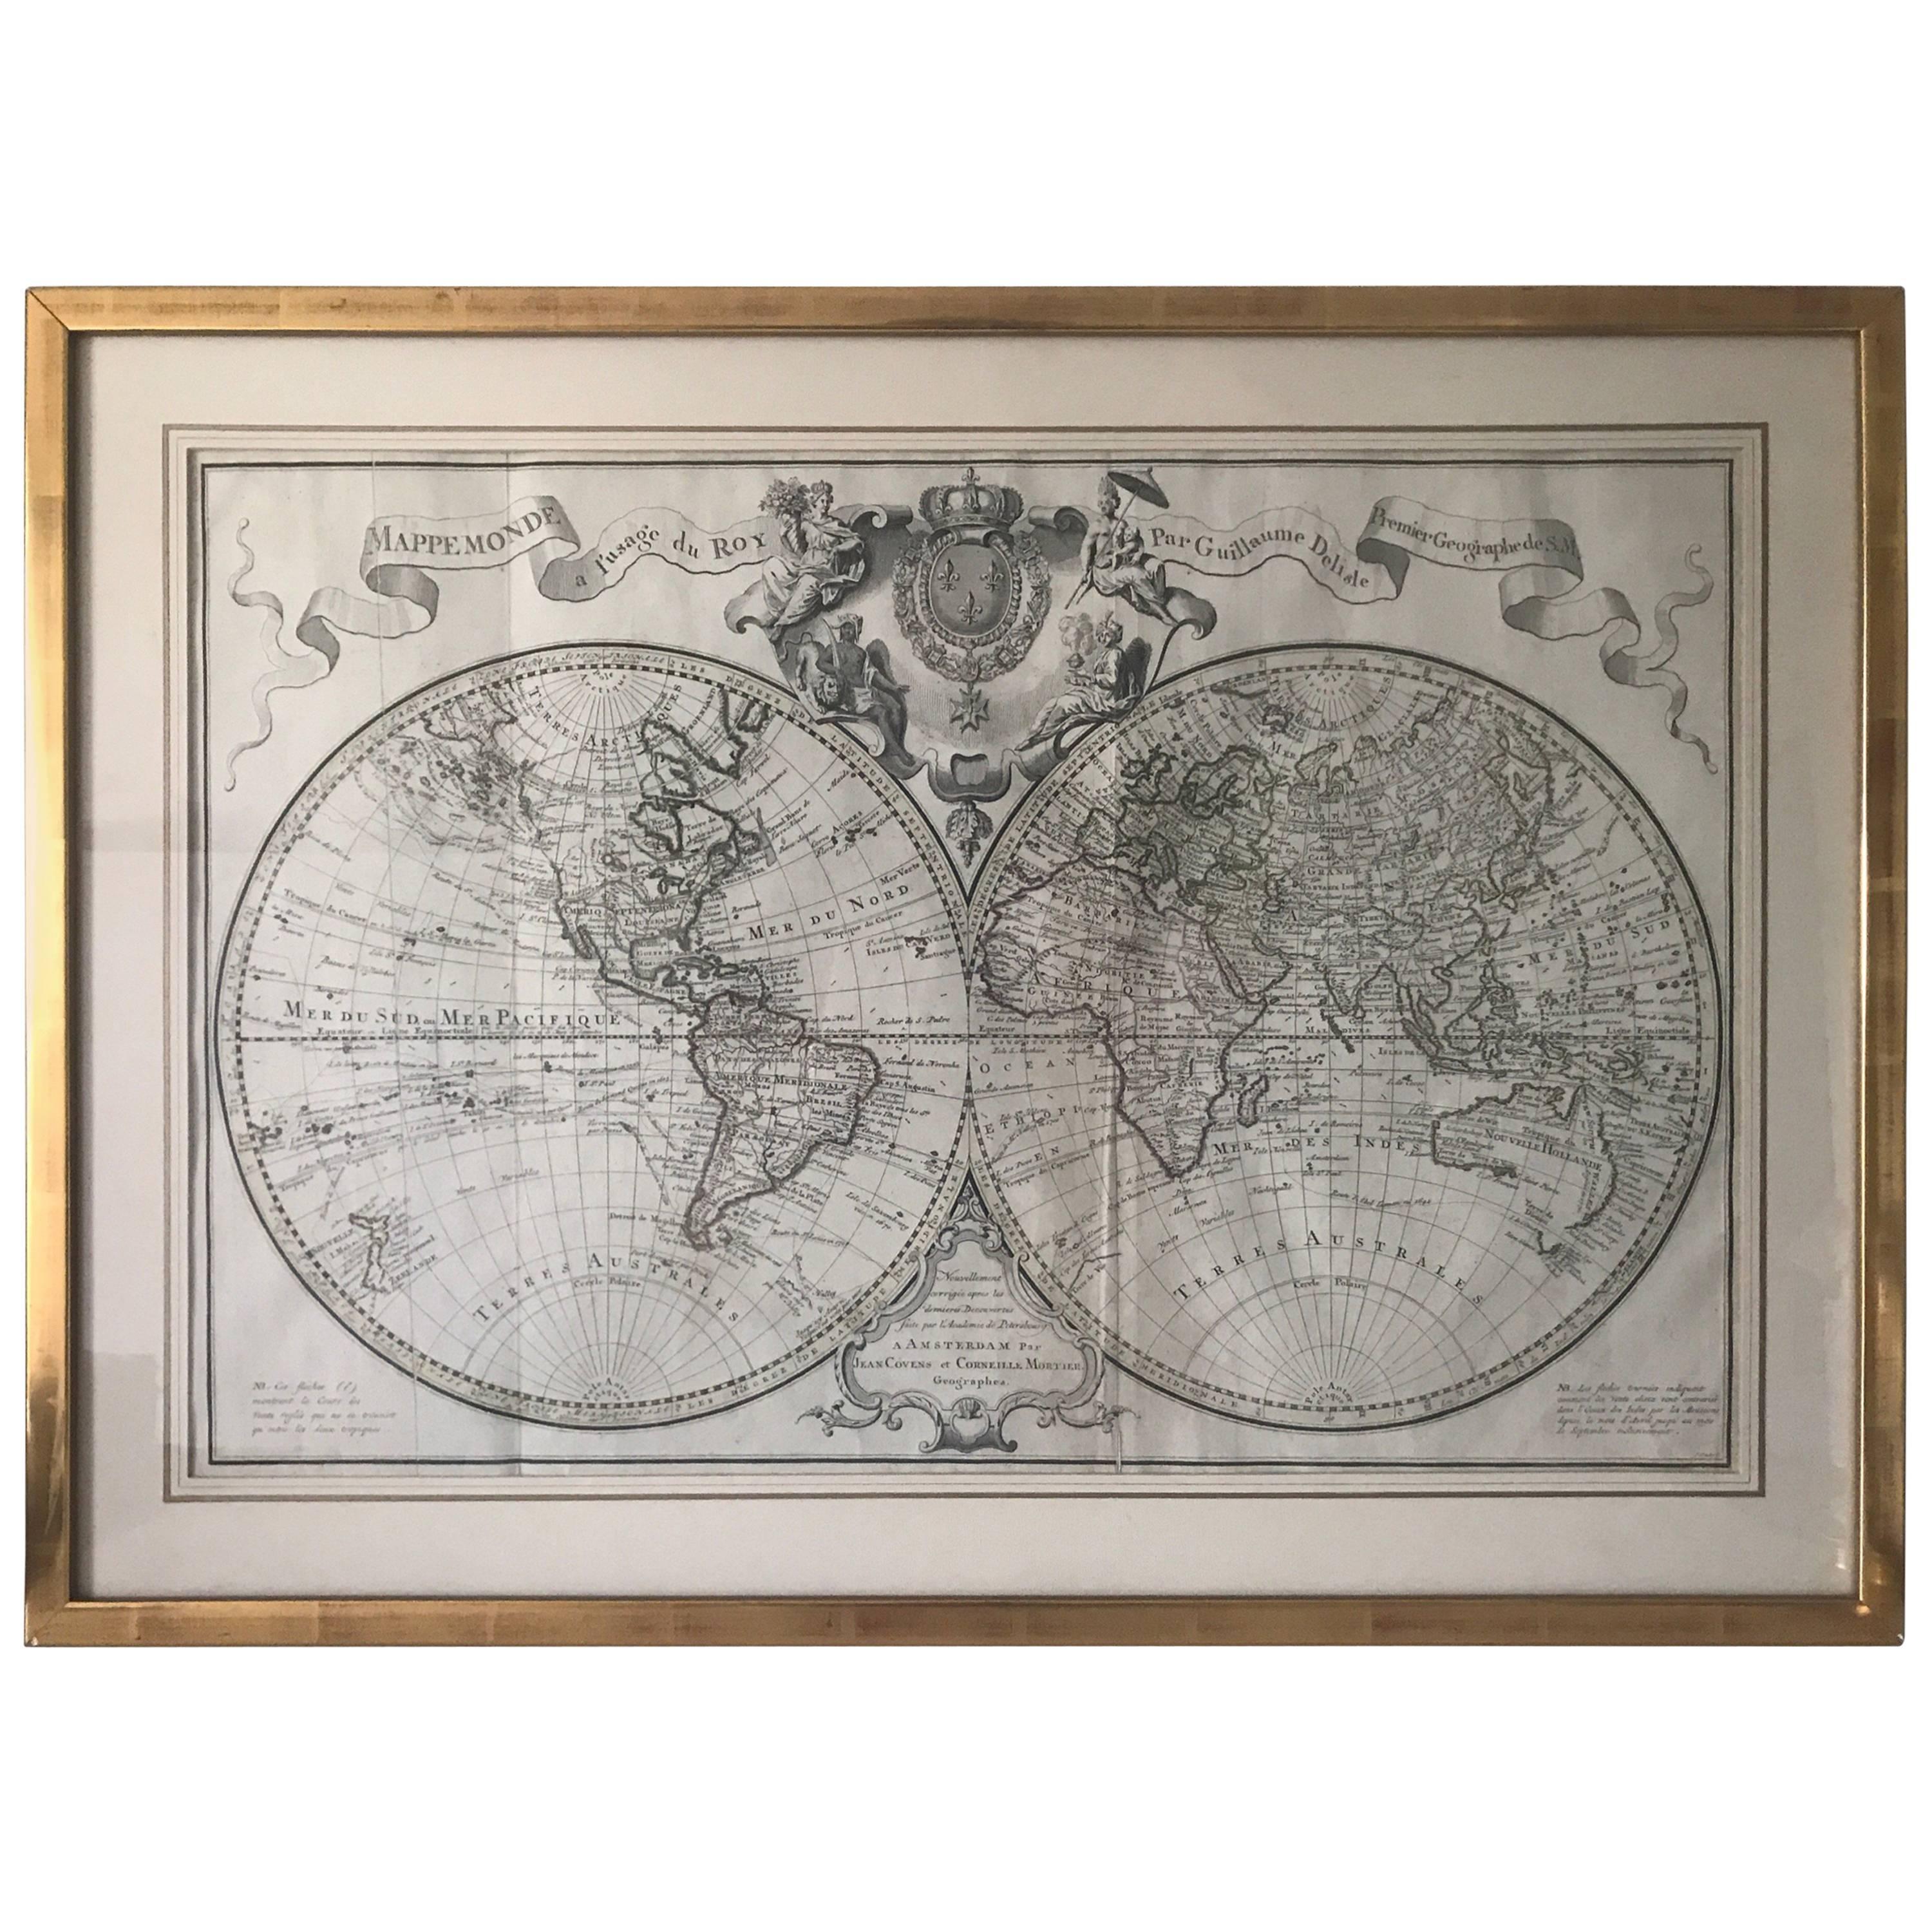 Extremely Rare Mappemonde a l'usage World Map Delisle, Guillaume Buache, 1730 For Sale